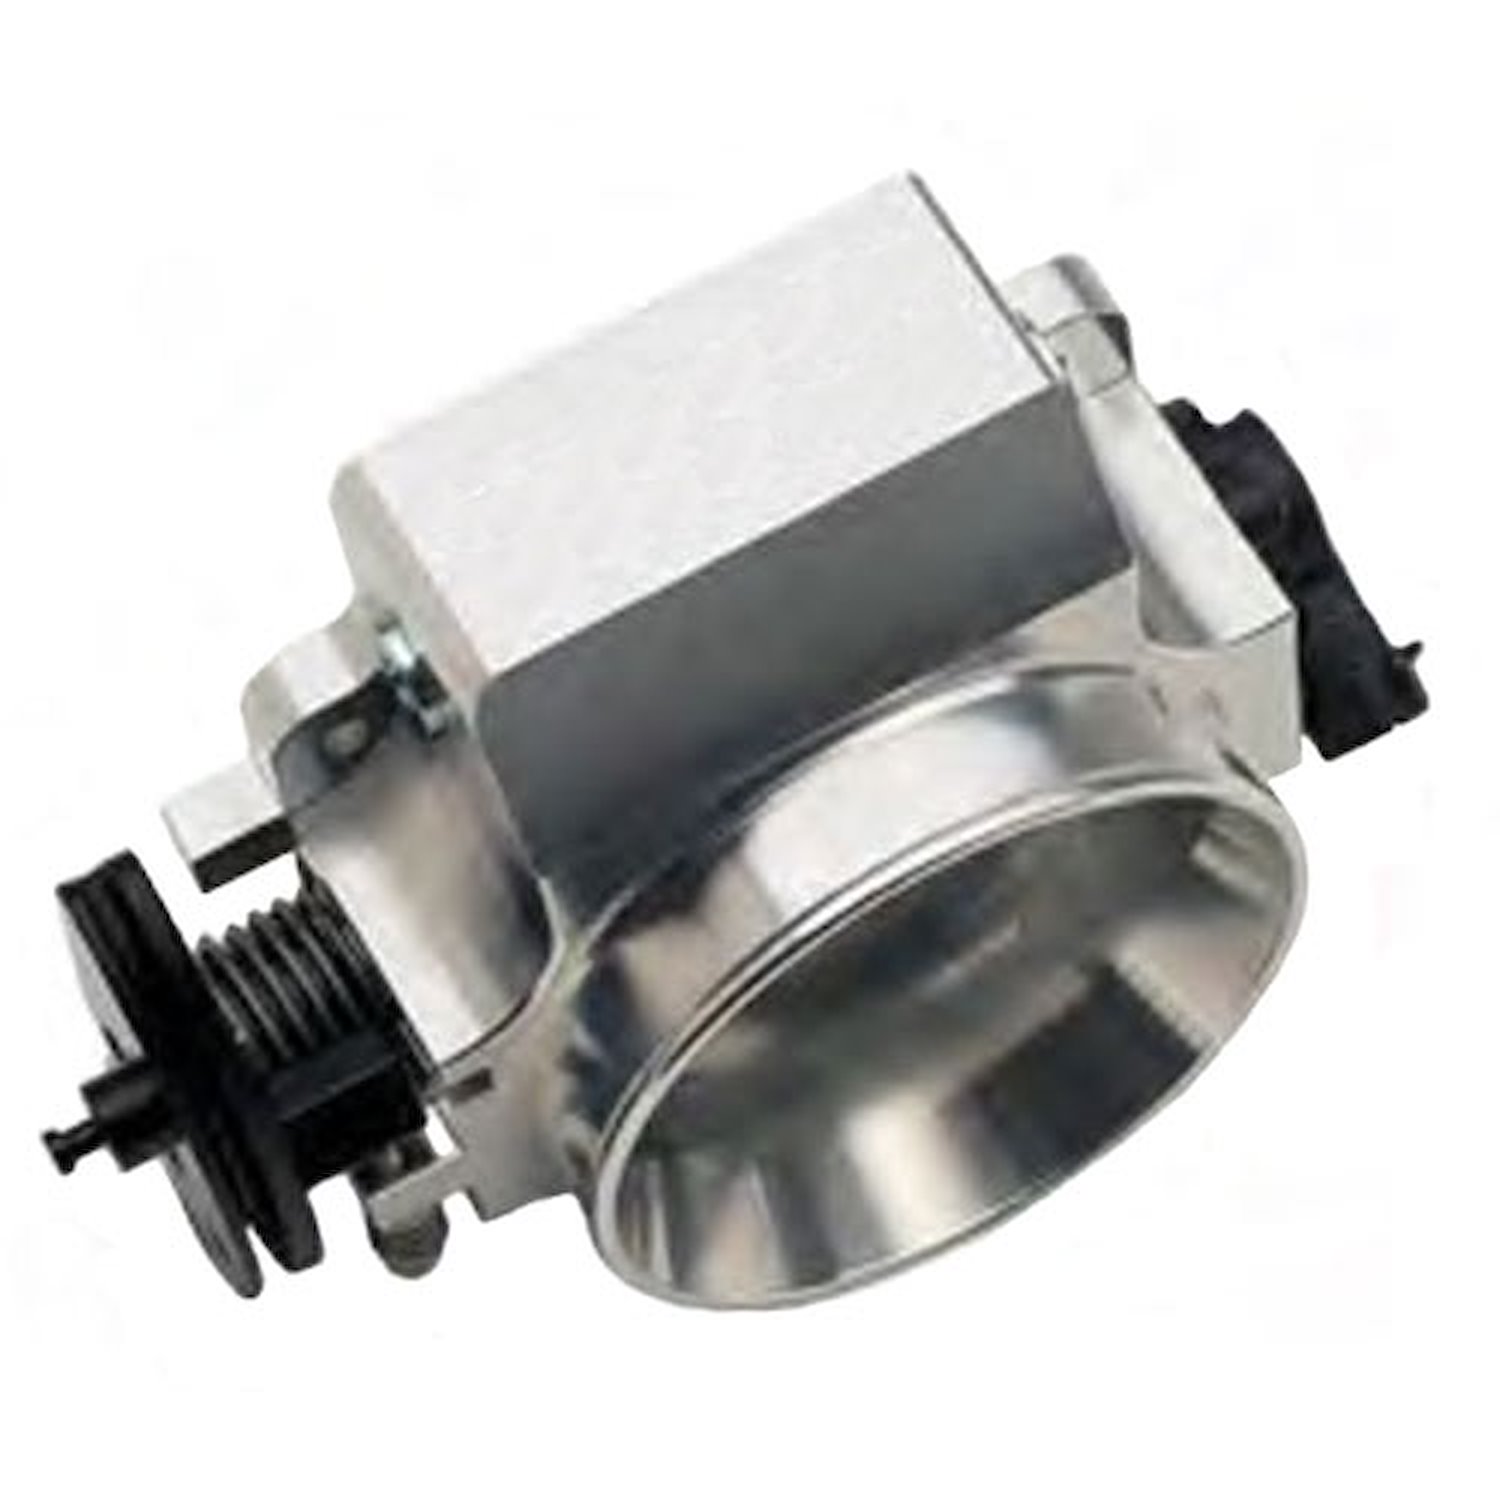 COPO 427ci Mechanical Throttle Body Assembly 102mm